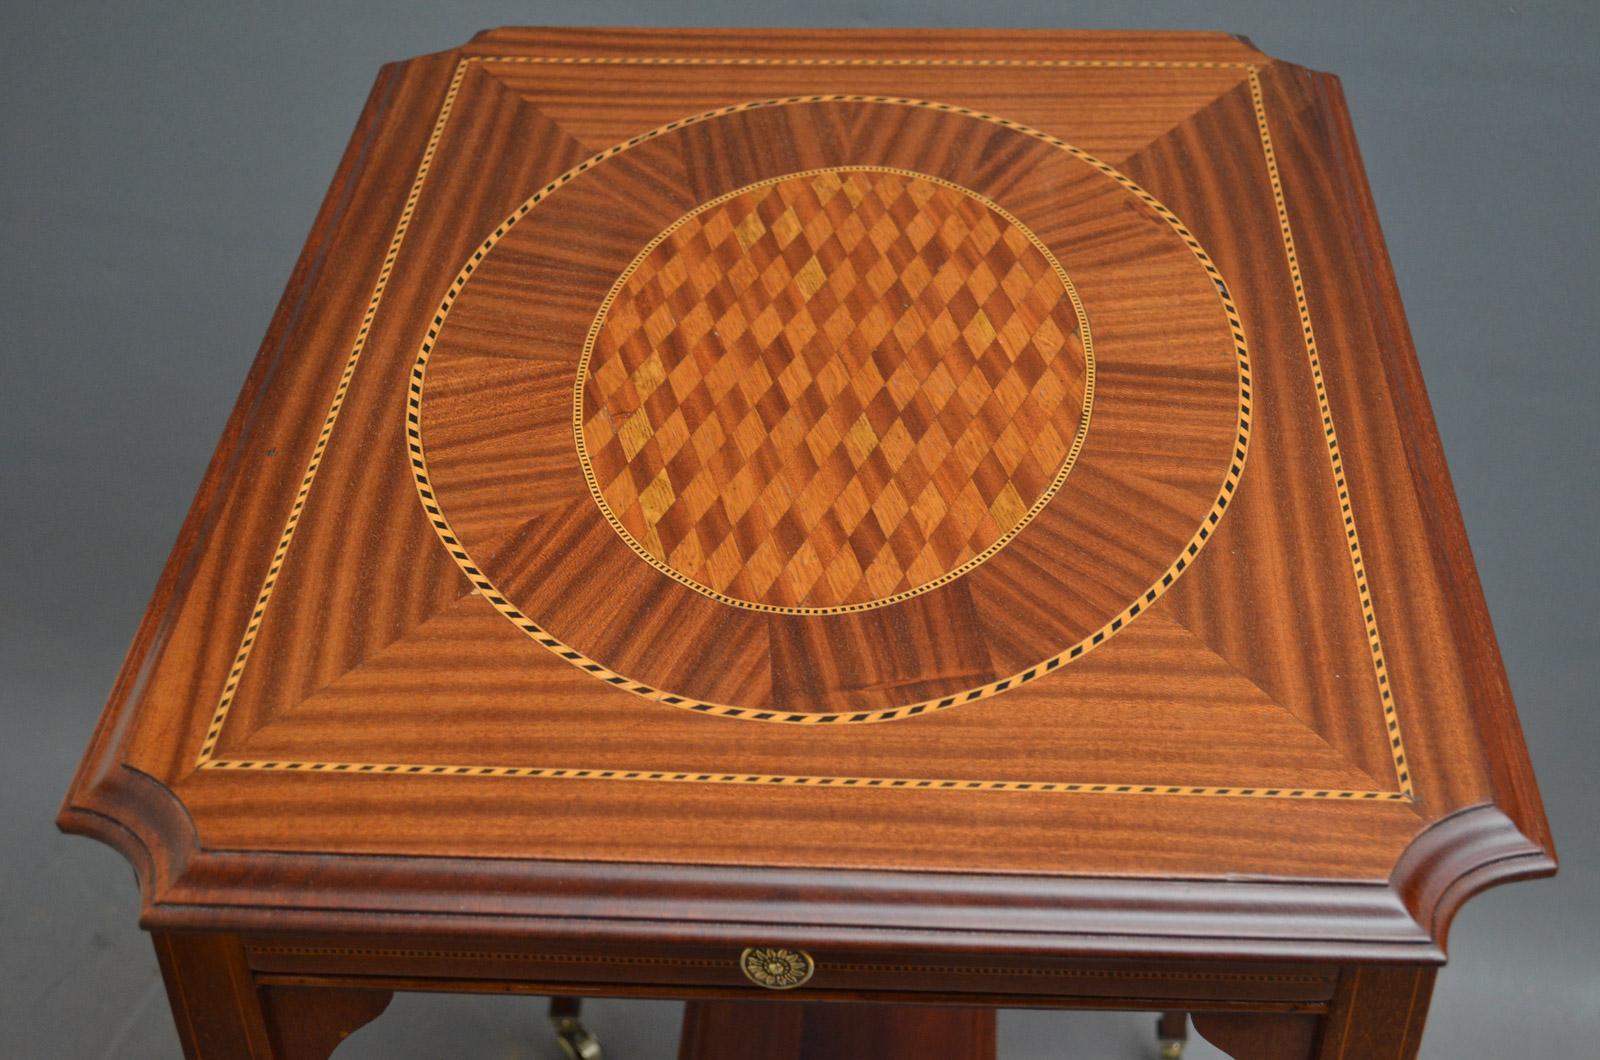 Sn3893, A very attractive Edwardian, mahogany table, having shaped top with geometrically inlaid top, practical frieze drawer and string inlaid legs united by undertier, all in wonderful condition throughout, ready to place at home, circa